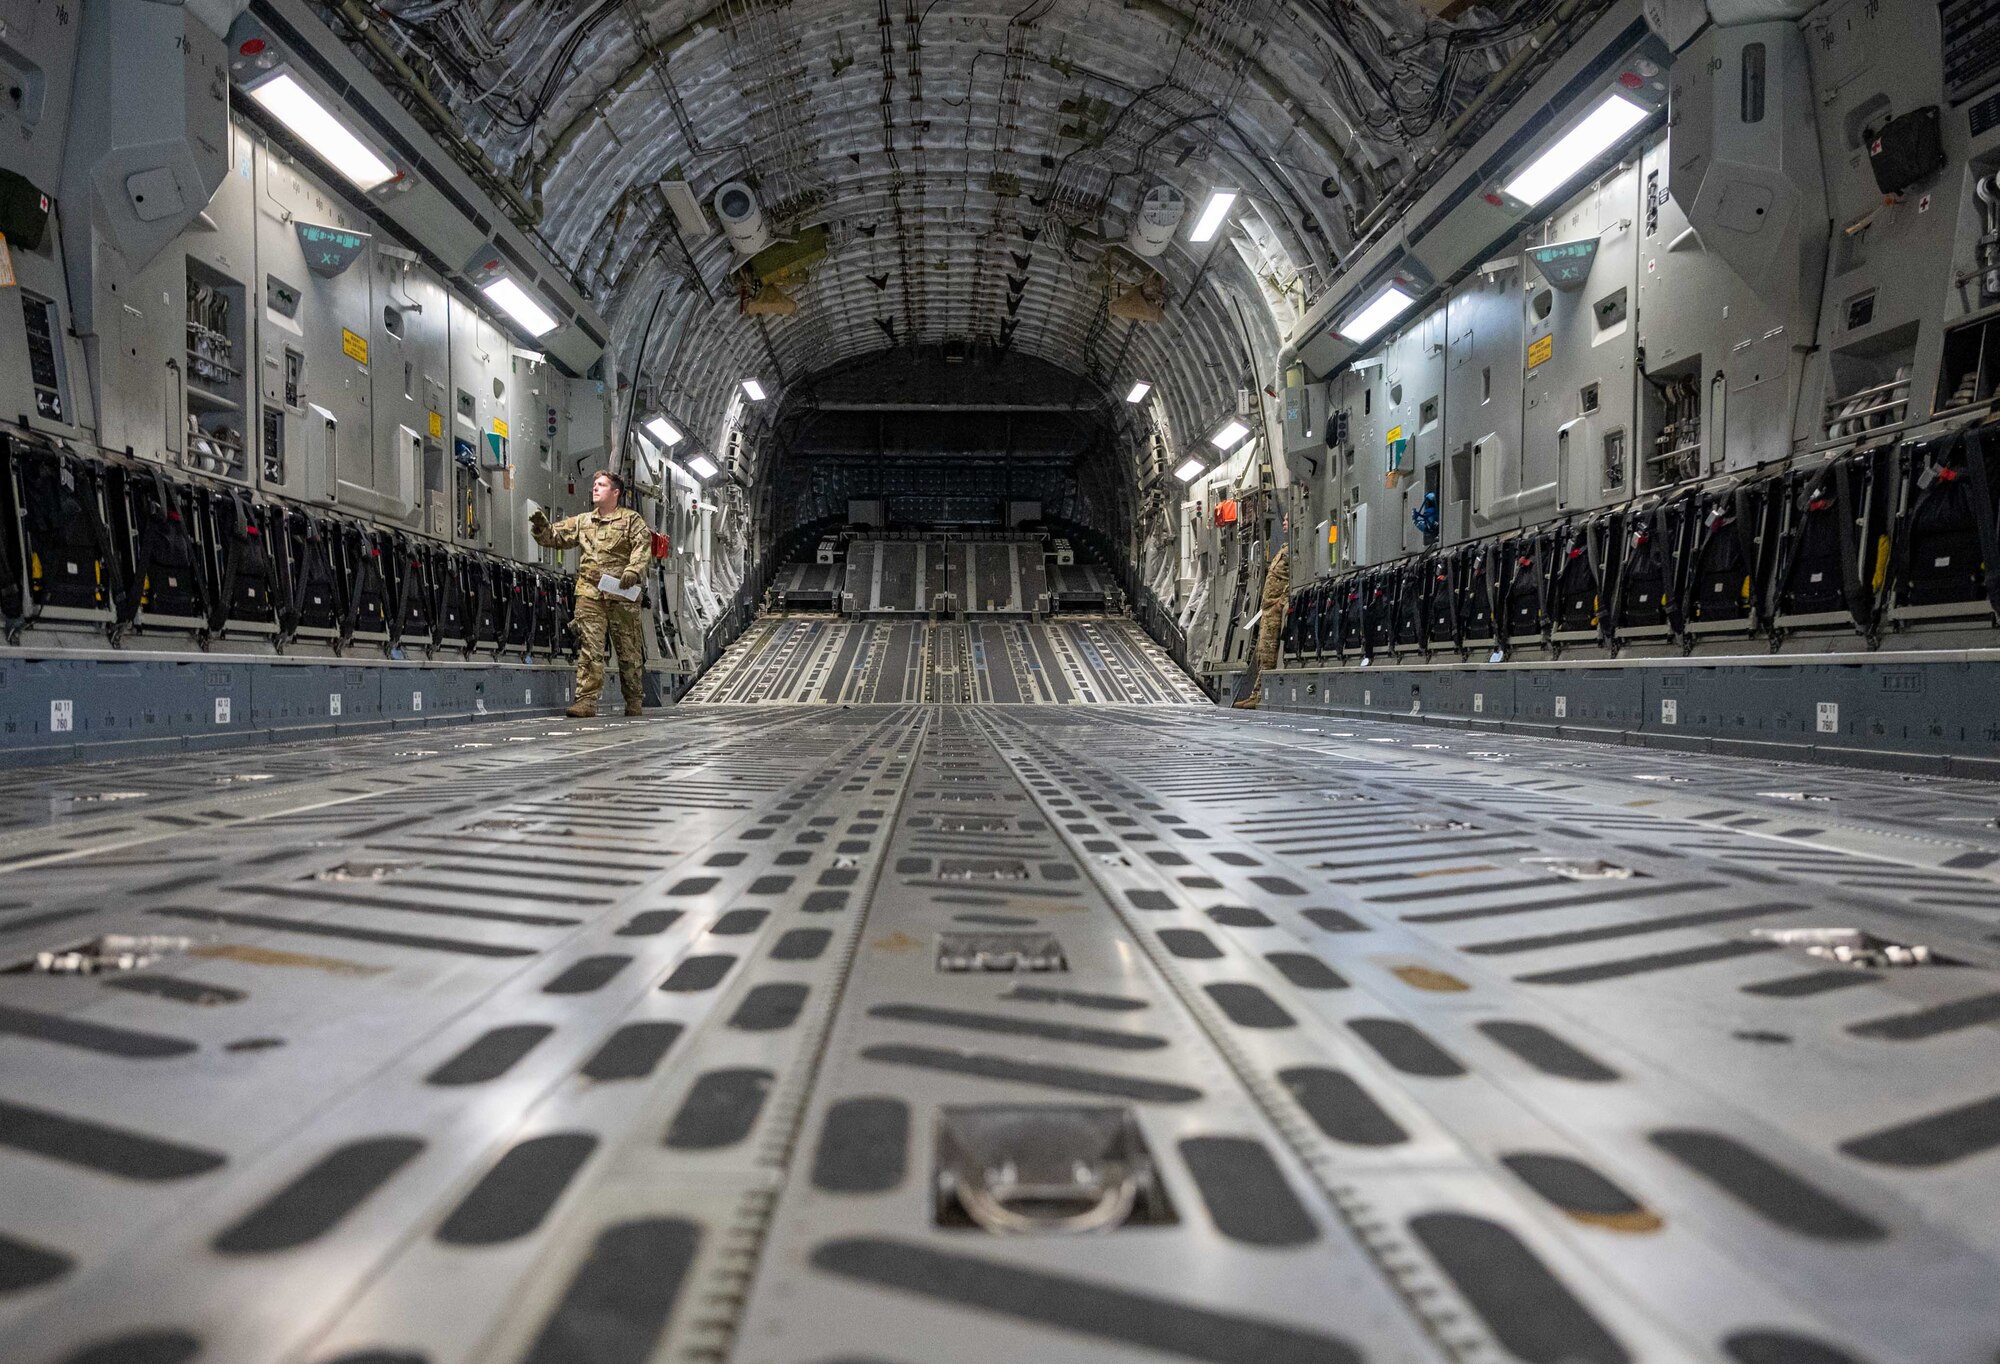 Staff Sgt. Daniel Lawrence, 3rd Airlift Squadron loadmaster, performs preflight checks in the cargo compartment of a C-17 Globemaster III before a local training mission at Dover Air Force Base, Delaware, June 15, 2022. The 3rd AS trains regularly to provide global reach with unique, outsized airlift capability. (U.S. Air Force photo by Senior Airman Faith Schaefer)